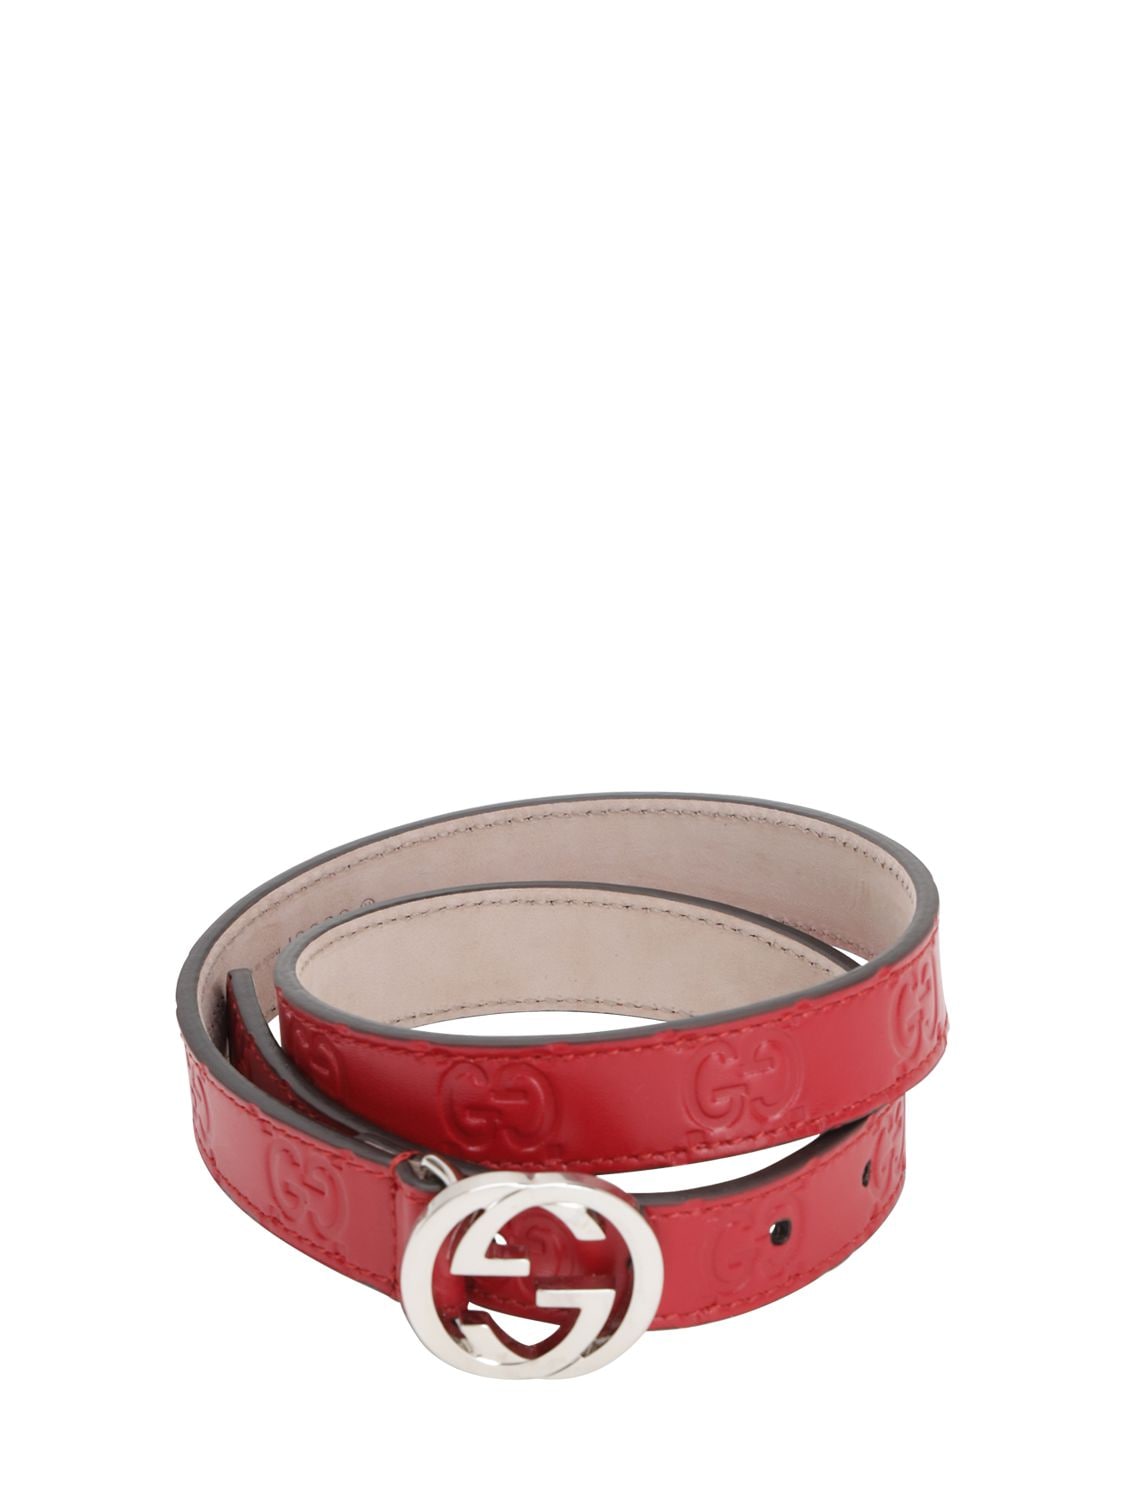 Gucci Babies' Embossed Interlocking G Leather Belt In Red